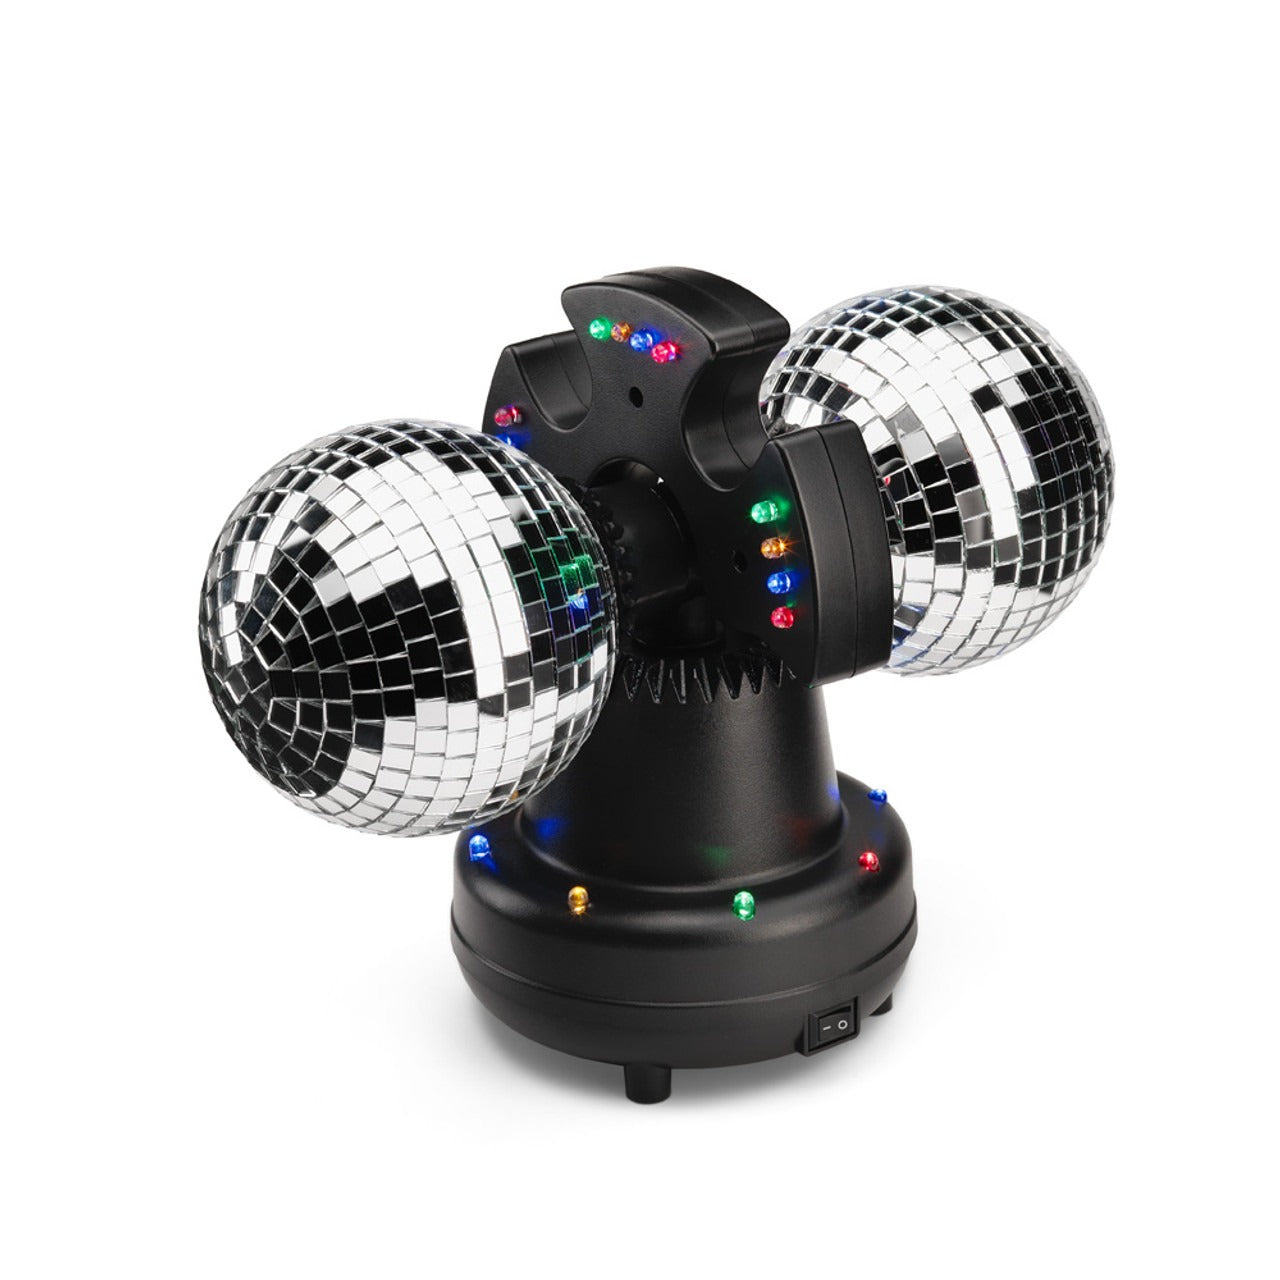 Twin Disco Ball in Black, Give your Children the greatest light show on earth with these twin rotating disco balls! A stunning light effect which will look great in any dark room or bedroom creating a fantastic sensory focus in the room full of colour and light. This compact gadget is a party that you can move around. It has two rotating mirror balls, measuring 10 cm each. These reflect multi-coloured LED lights, creating a flurry of colour on your walls! This light is fantastic for house parties (did we me